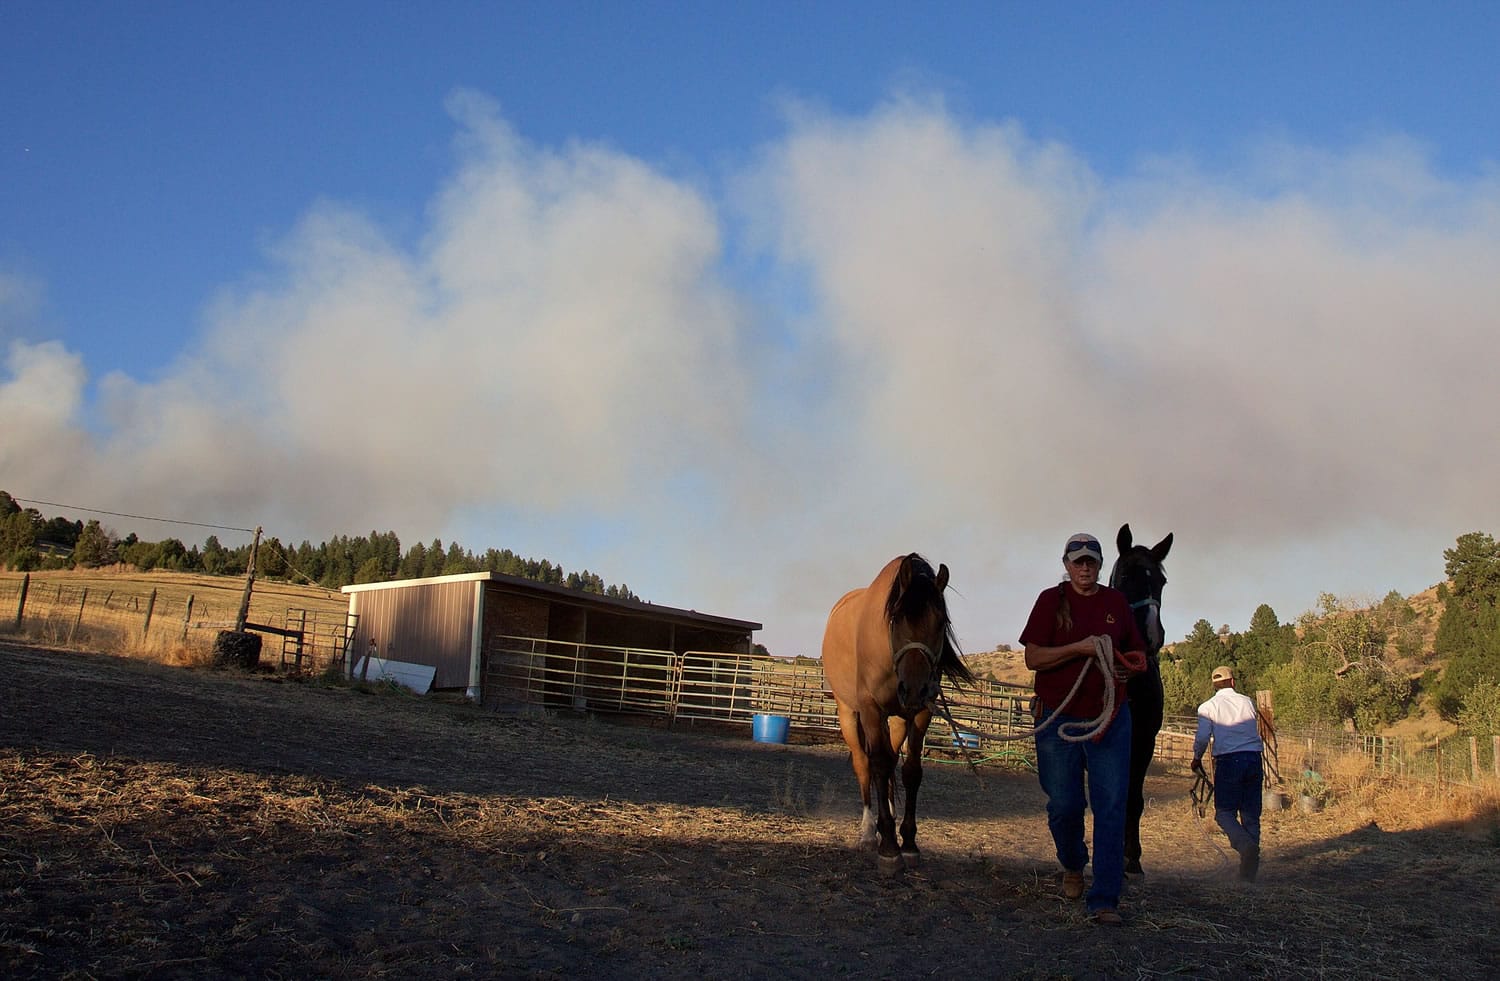 Gale Sheppard evacuates her horses as a wildfire approaches in Prairie City, Ore., on Thursday.